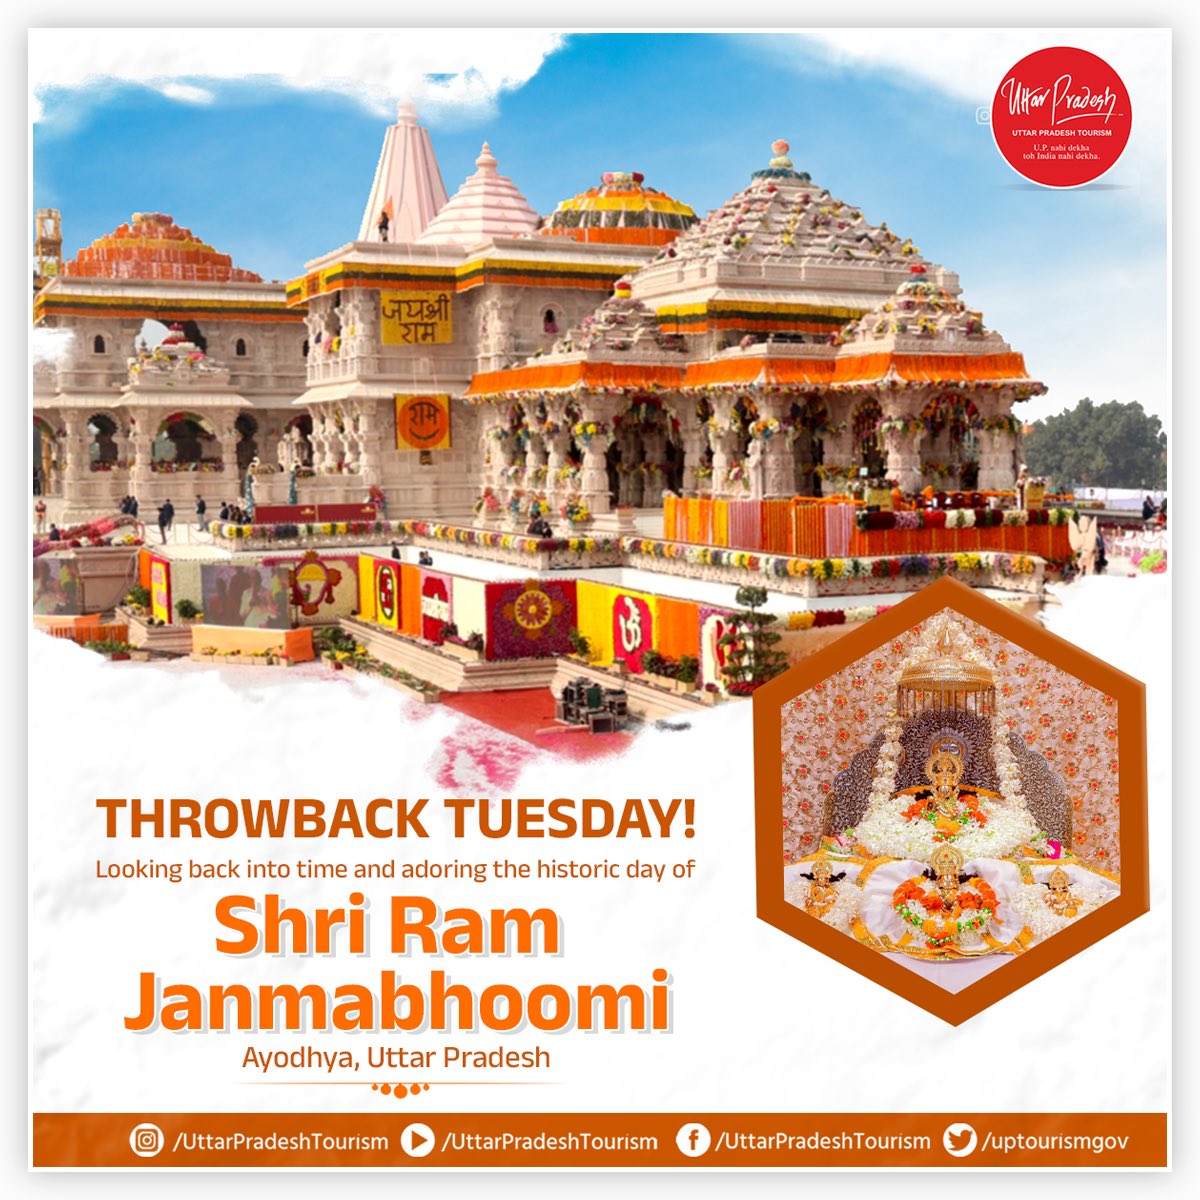 Throwback to an iconic moment in history!
Let's adore the charm of the timeless beauty of #ShriRamJanmabhoomi in #Ayodhya, #UttarPradesh.

#UPTourism #ReligiousTourism #UttarPradeshTourism 
@MukeshMeshram